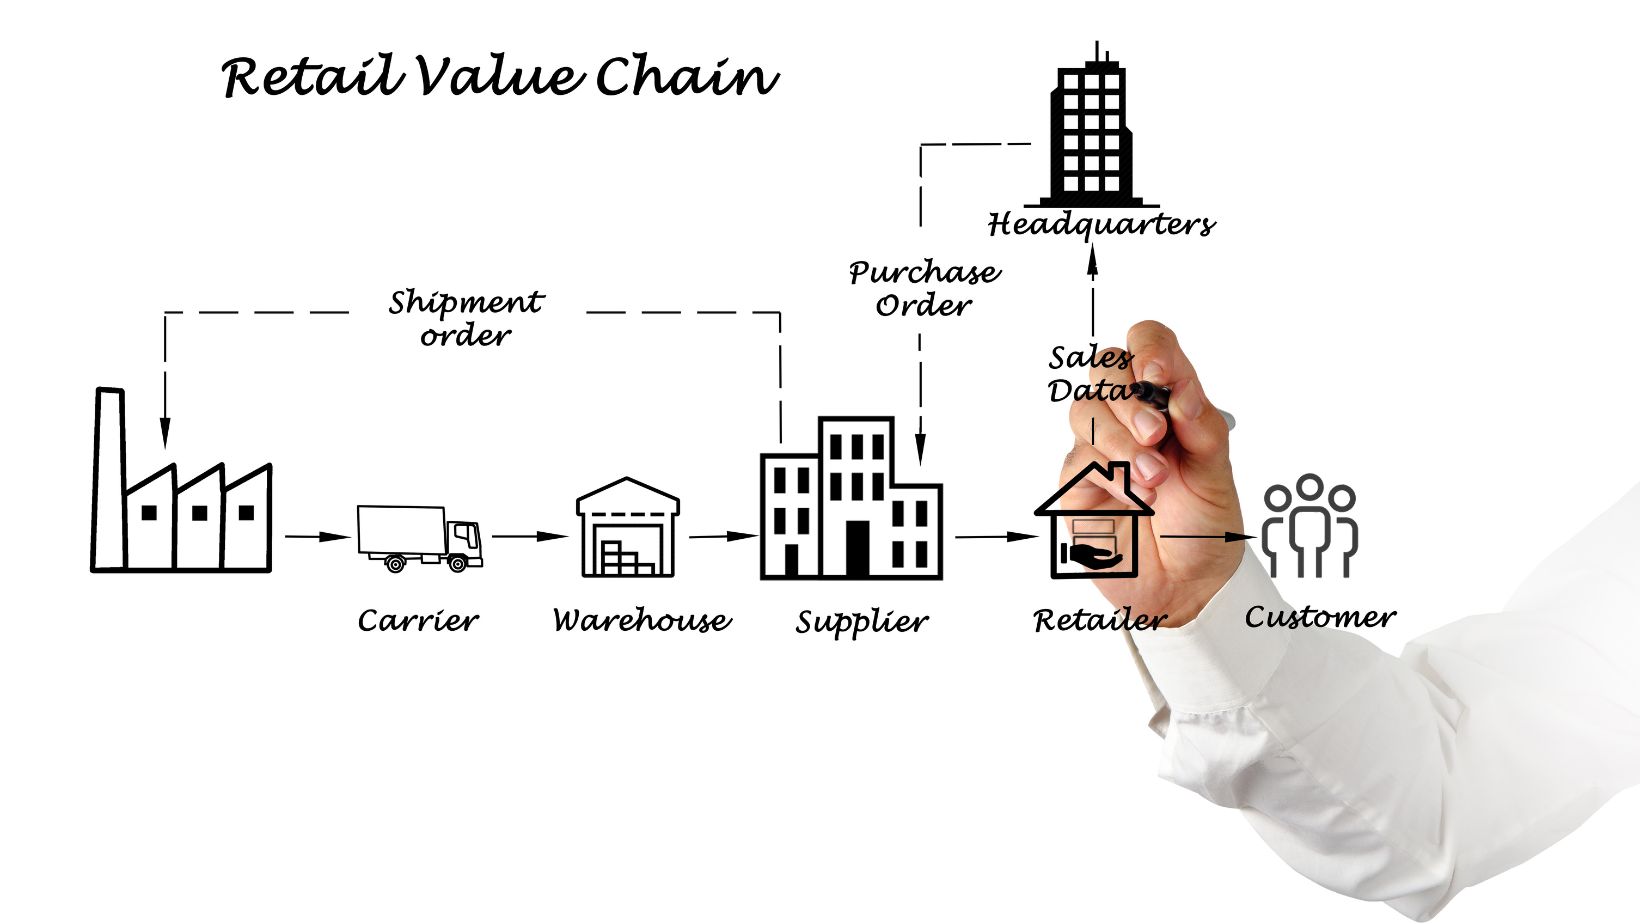 decisions relating to "what stages of the industry value chain to participate in" determine a firm's